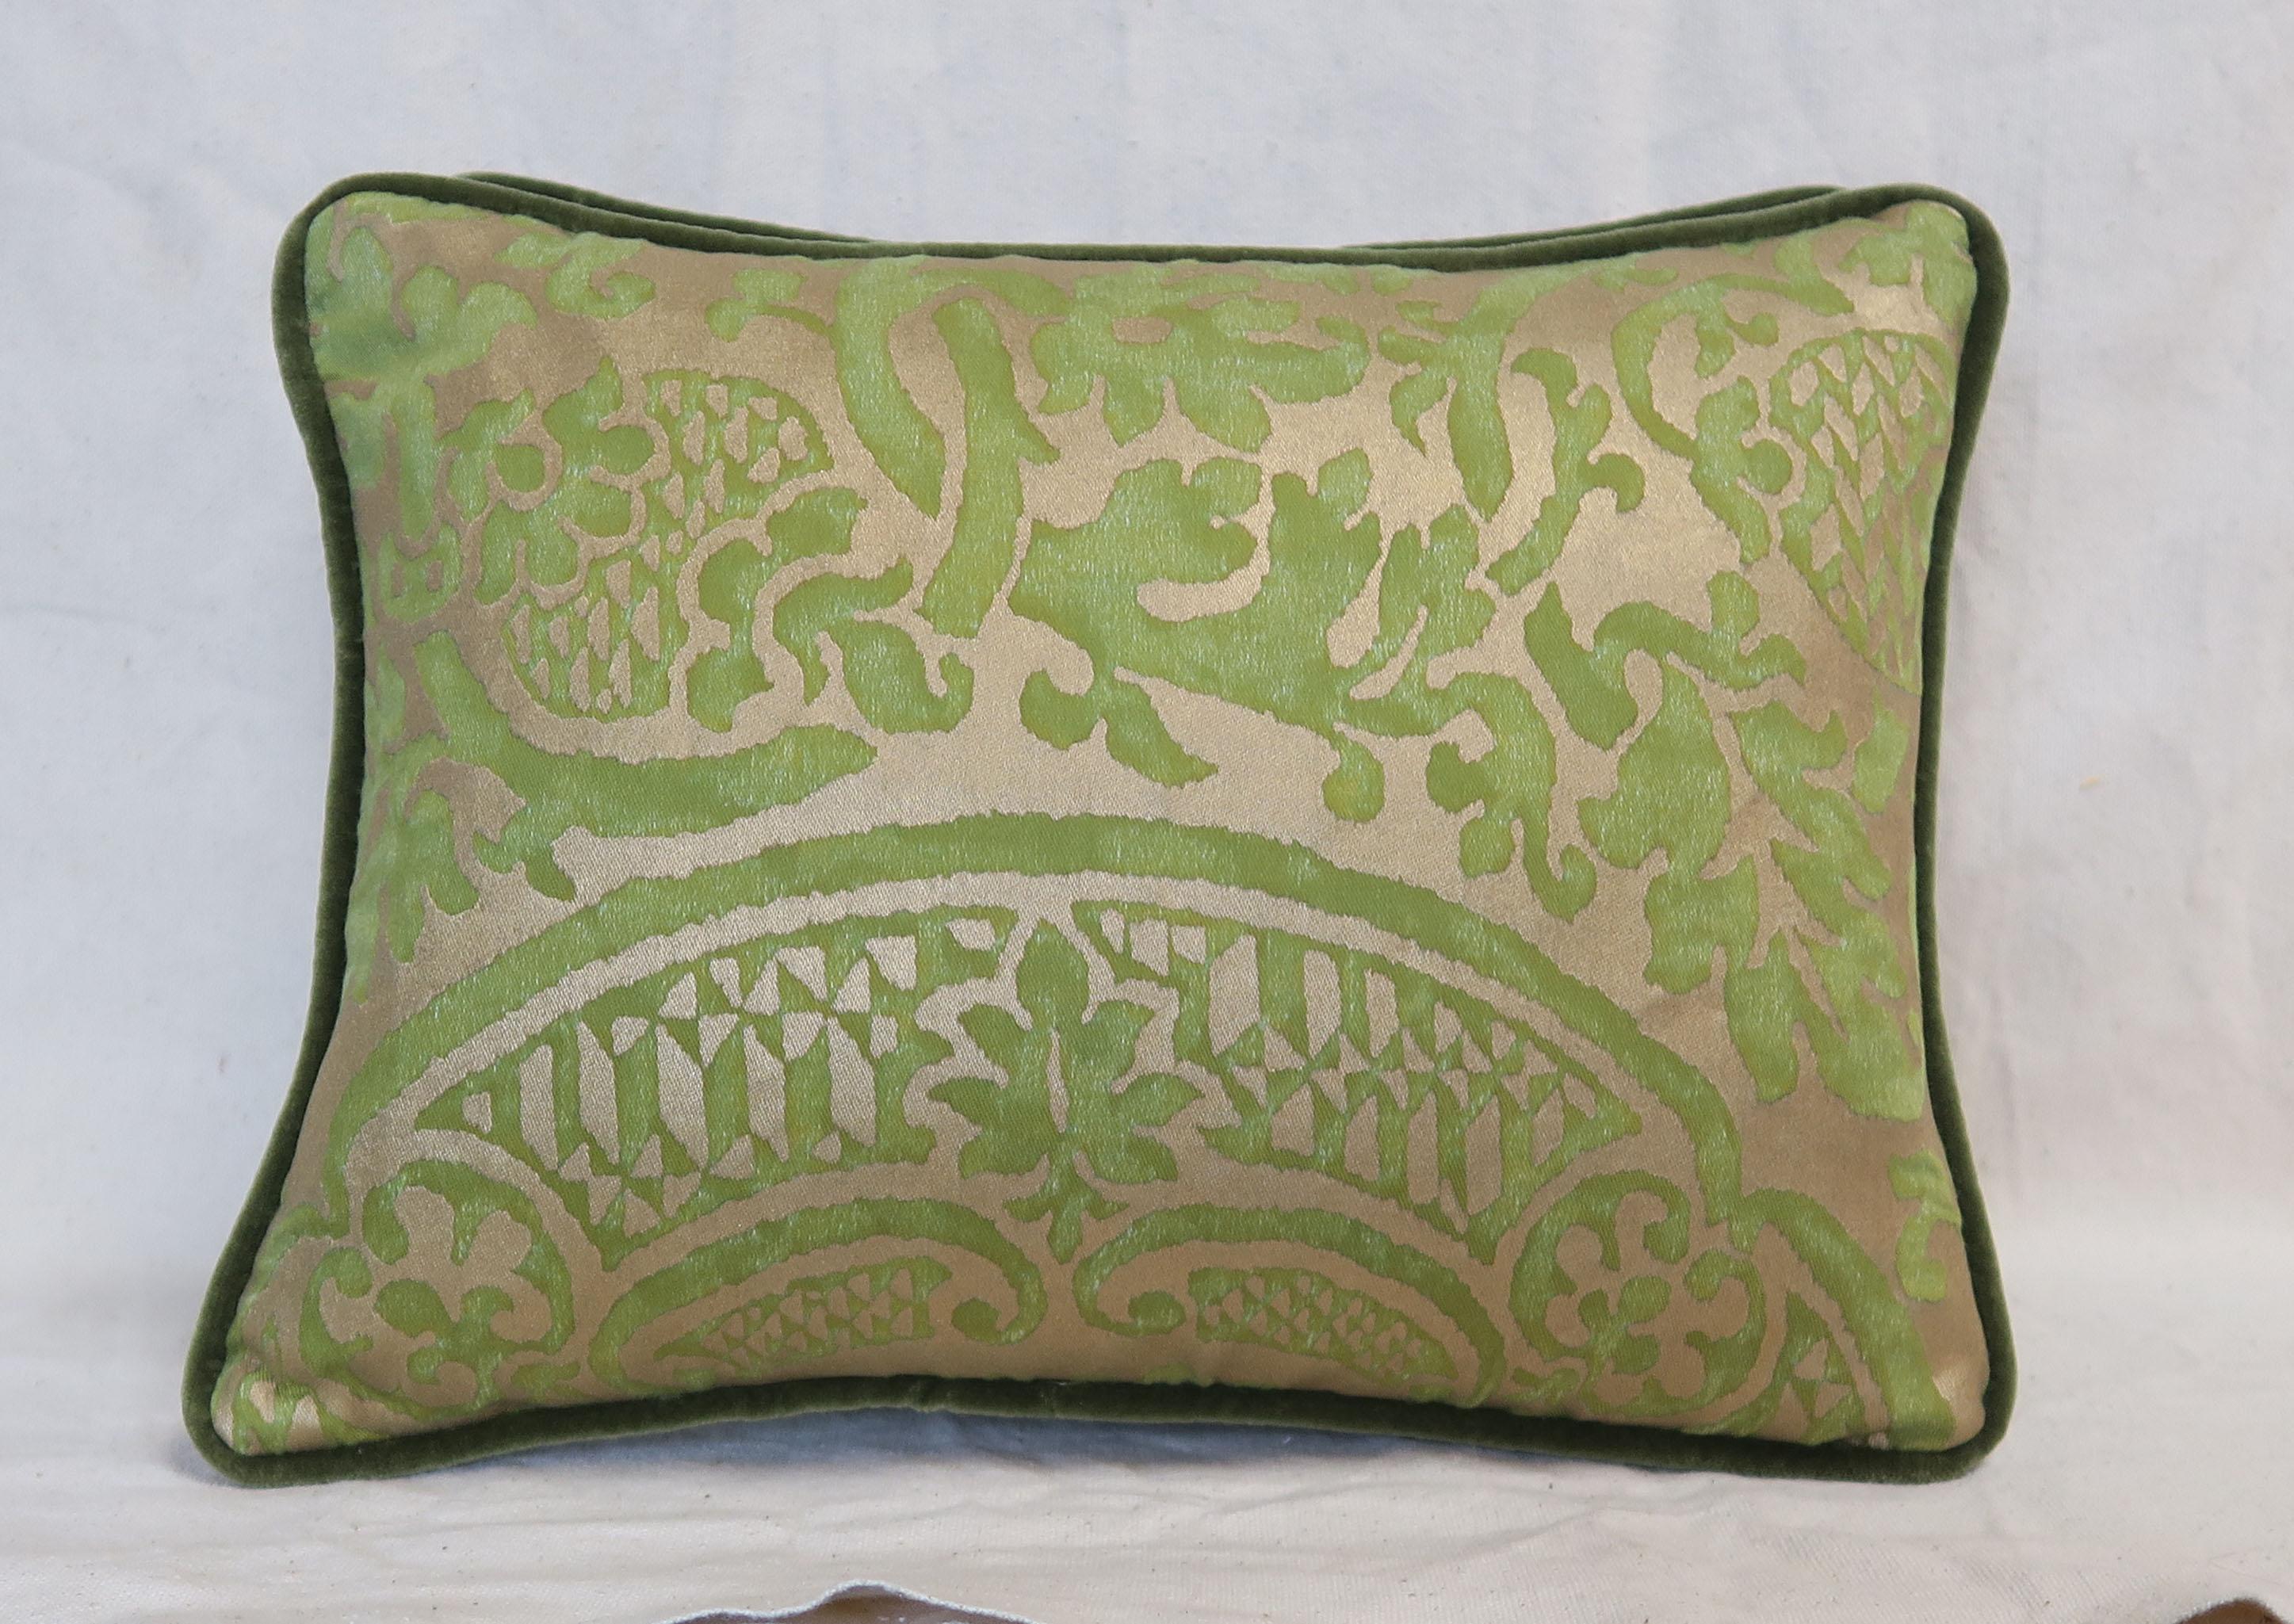 Pair of custom pillows designed with authentic Mariano Fortuny Orsini Patterned Egyptian cotton in green and silvery gold. Dark green velvet backs with self cord detail. Down inserts, sewn closed.